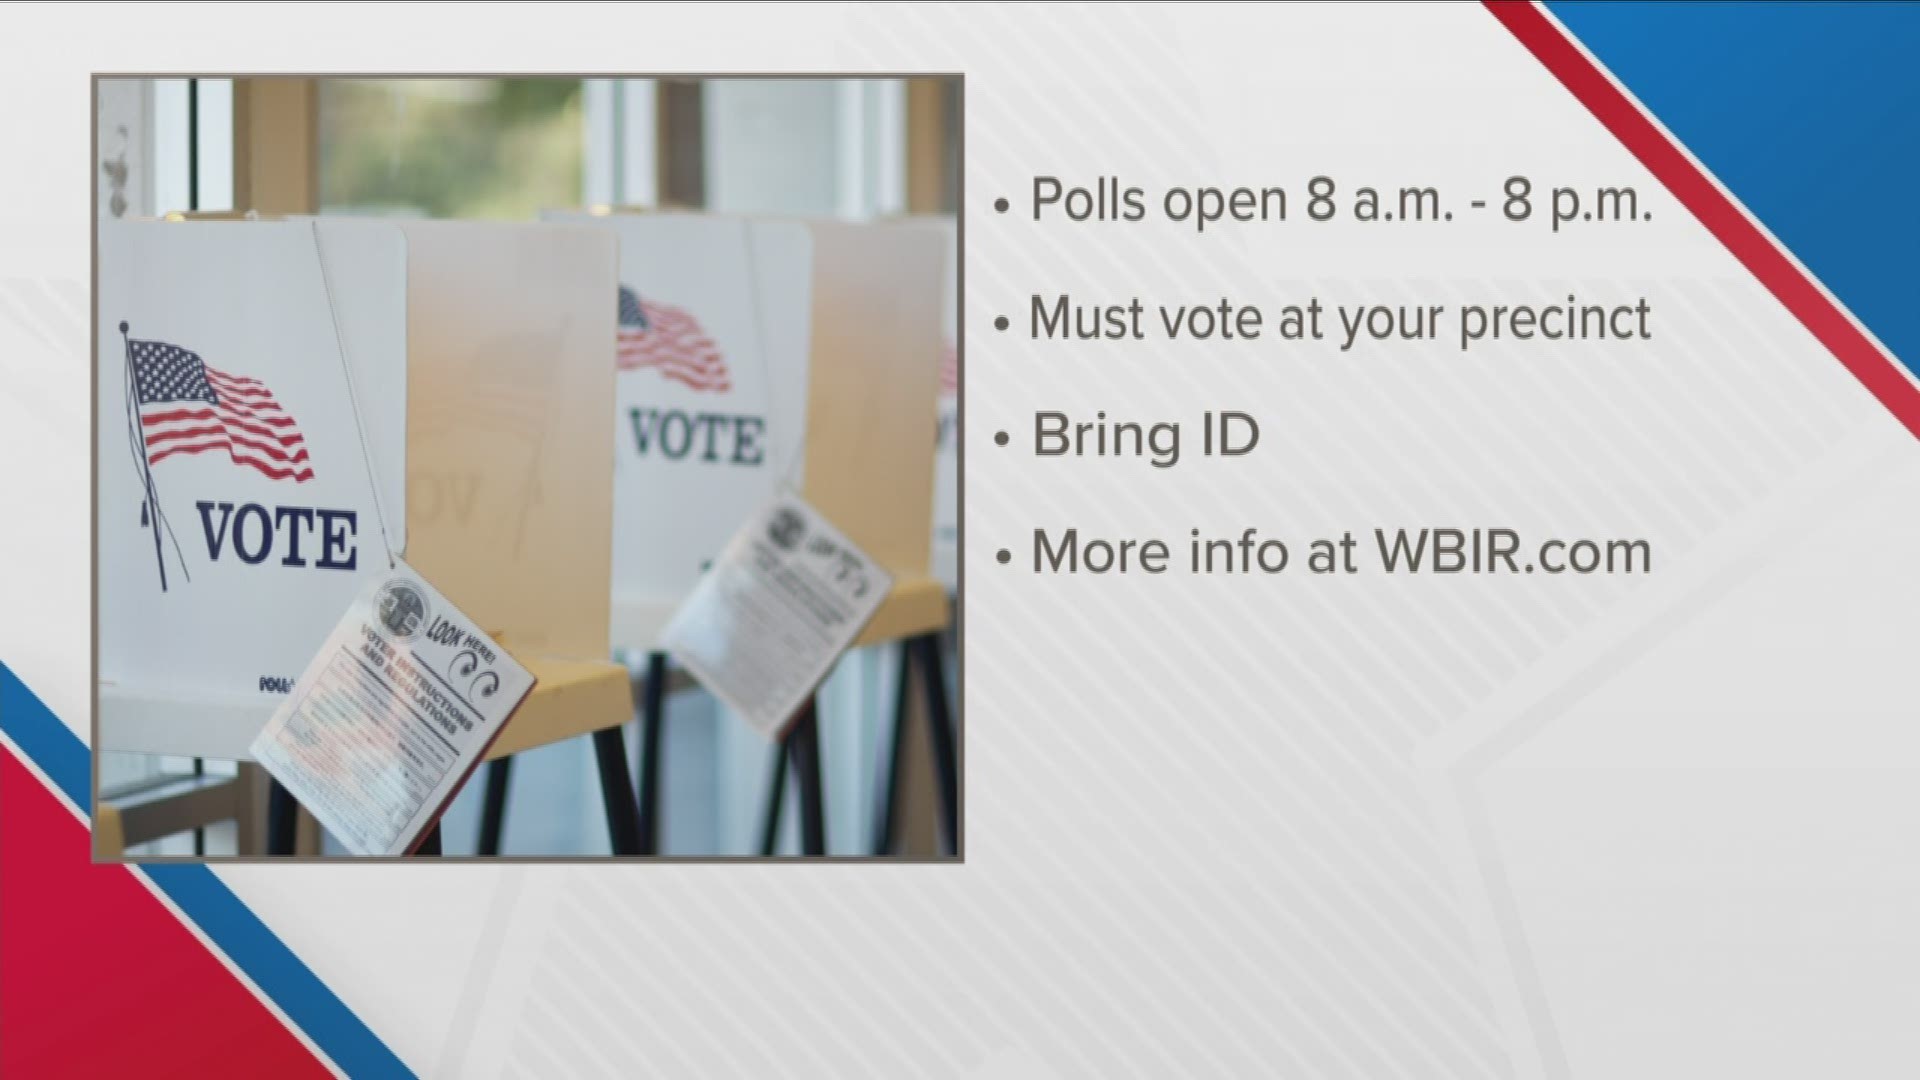 The polls will be open from 8 a.m.- 8 p.m. in Knoxville for Election Day.